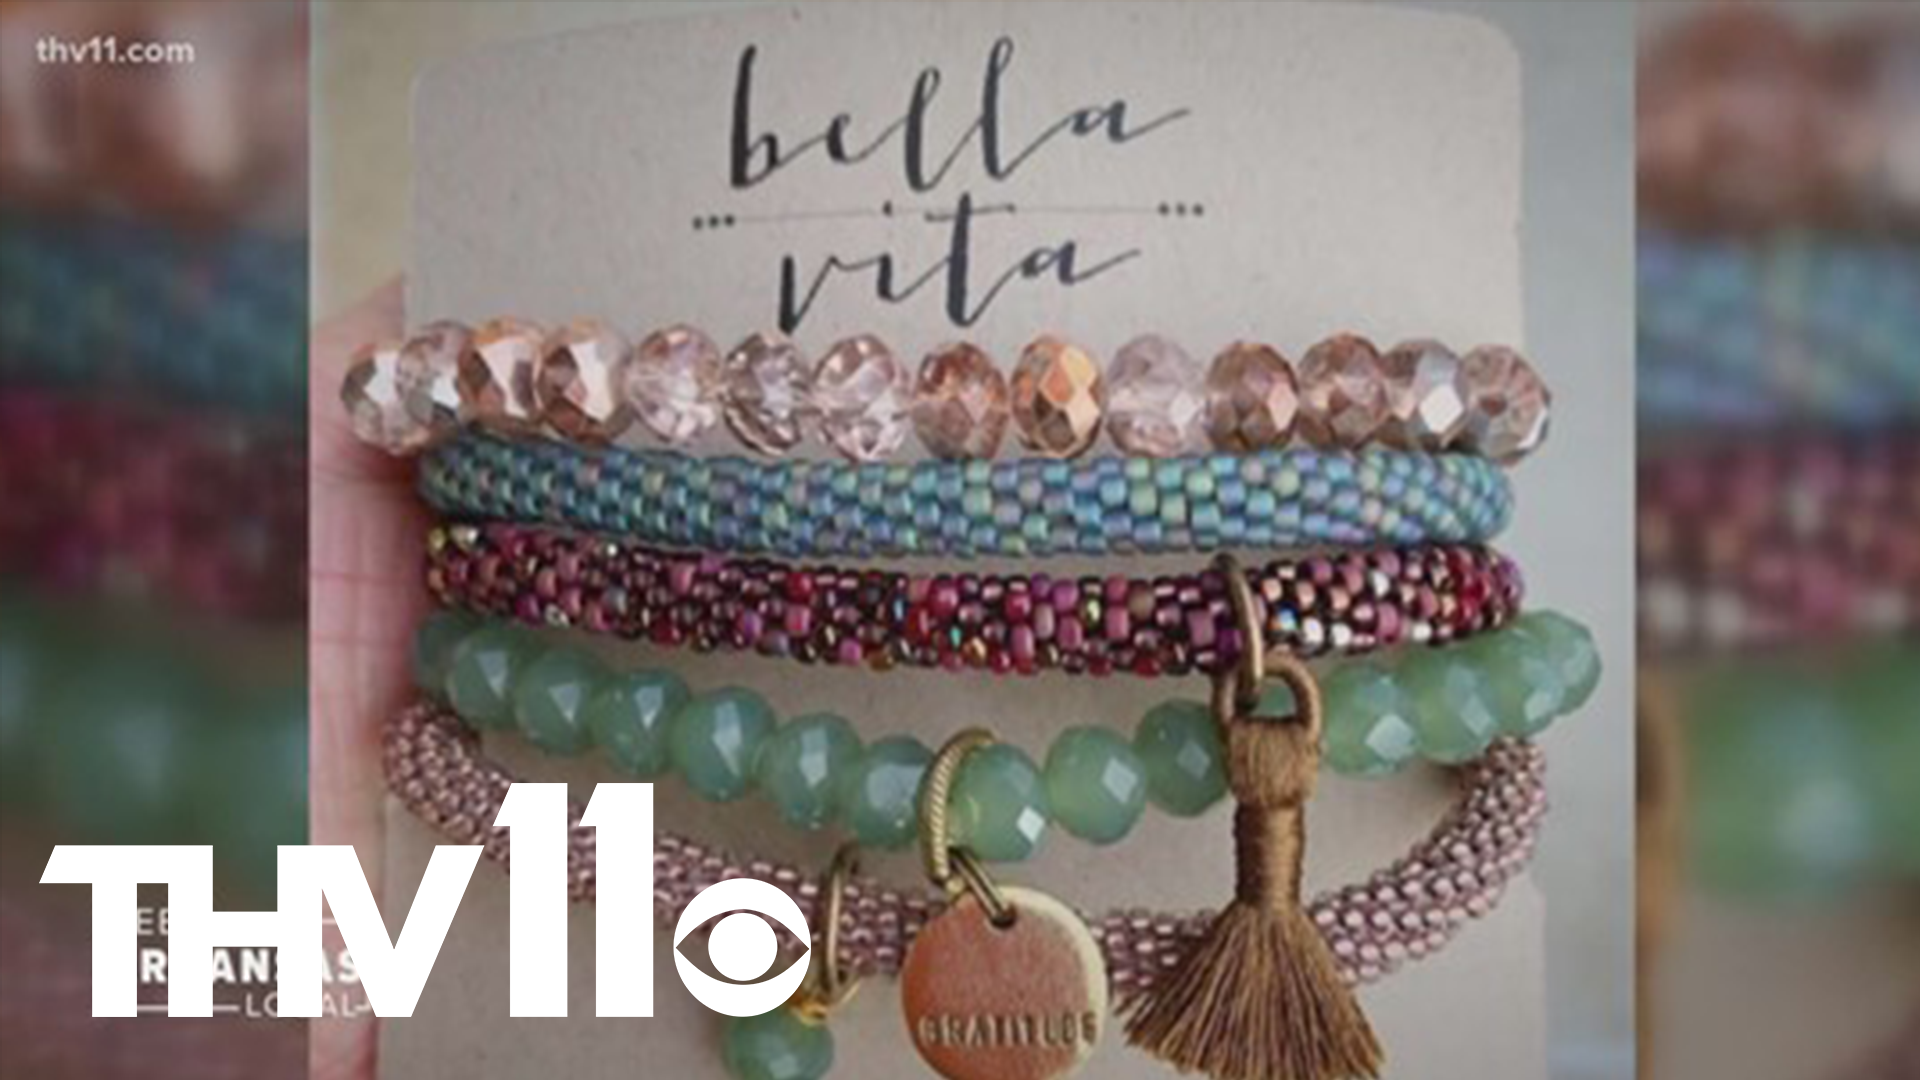 We take you to Bella Vita Jewelry for gifts you won't find anywhere else.